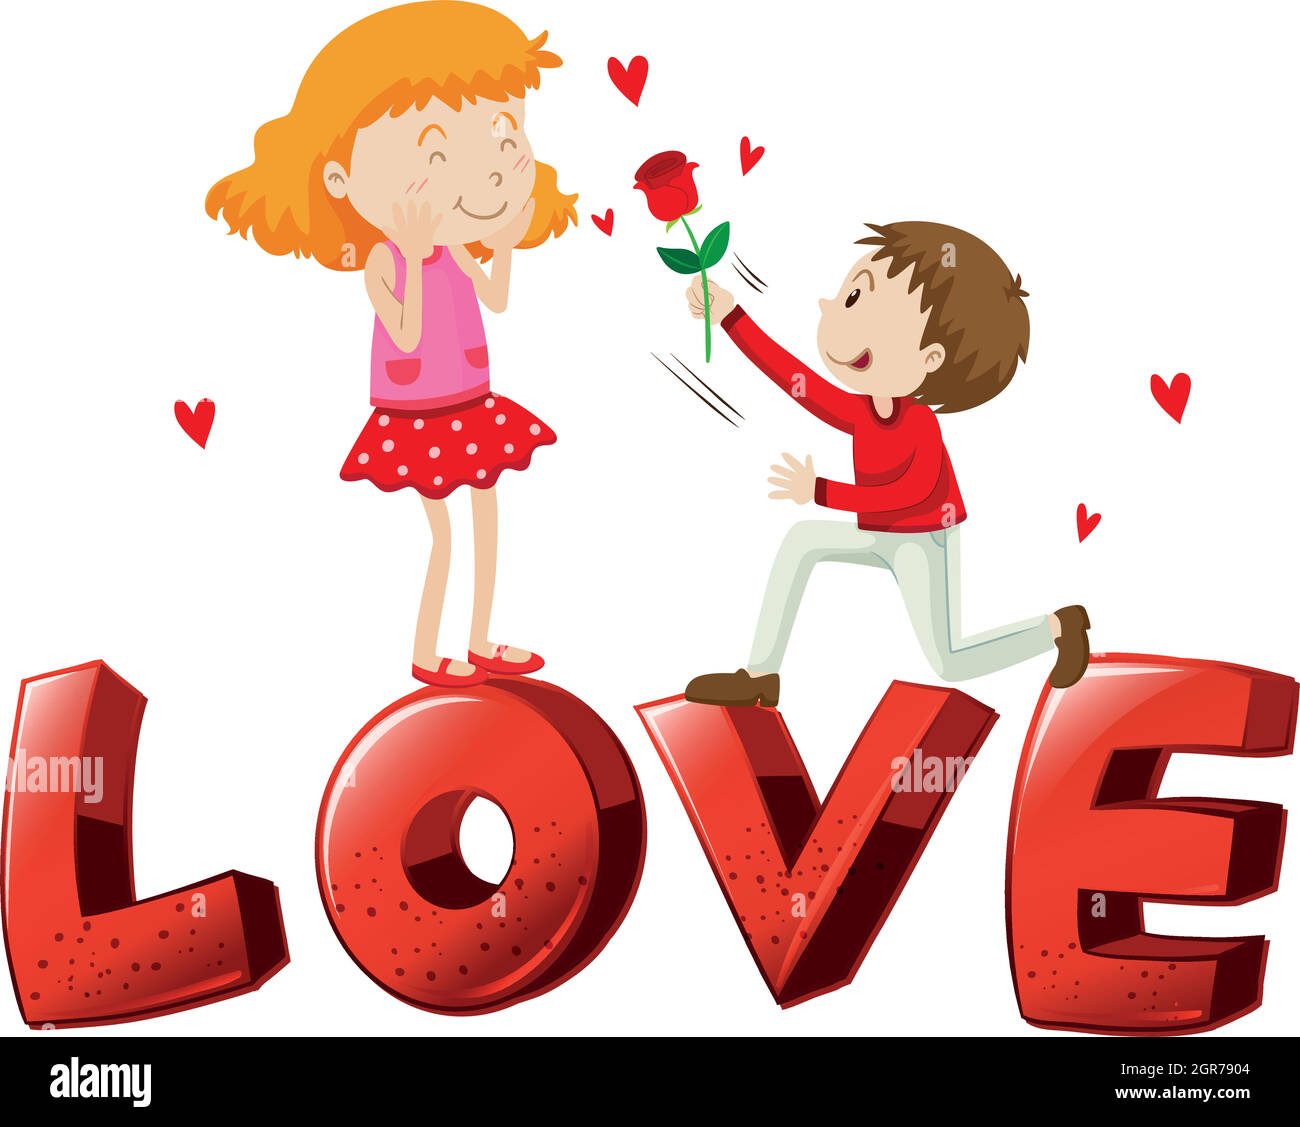 Font design for word love with love couple Stock Vector